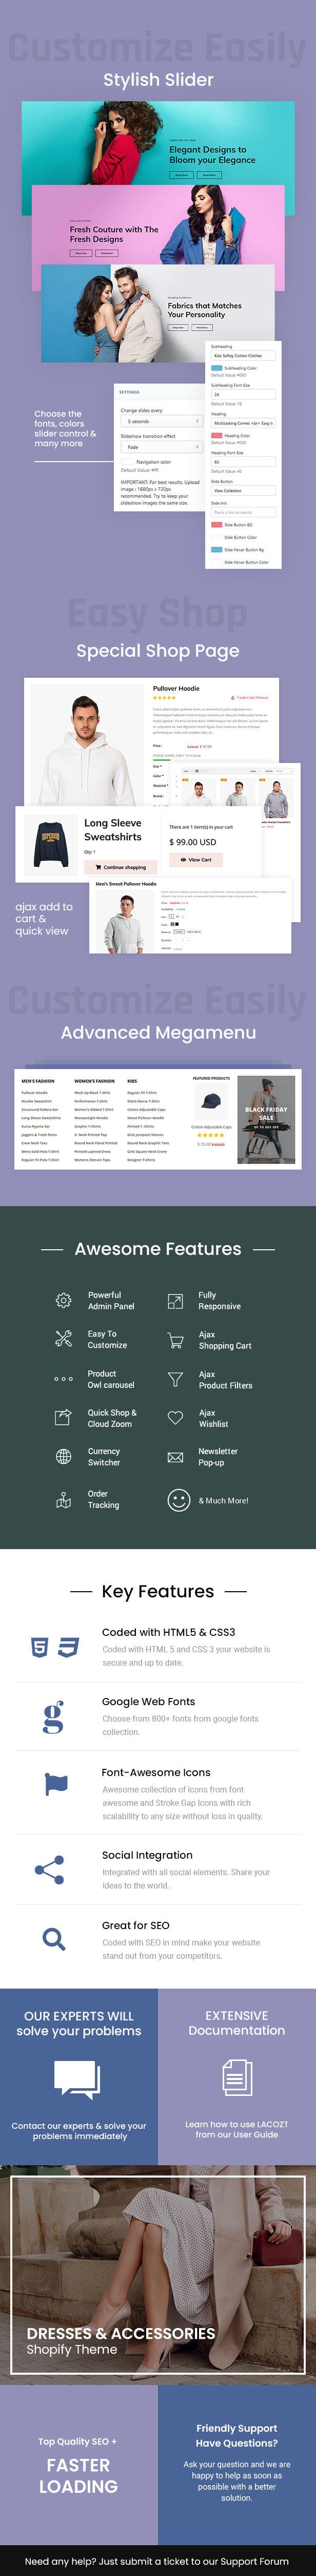 Special shop page of Lacozt - Multipurpose Clothing, Fashion Store Shopify Theme.